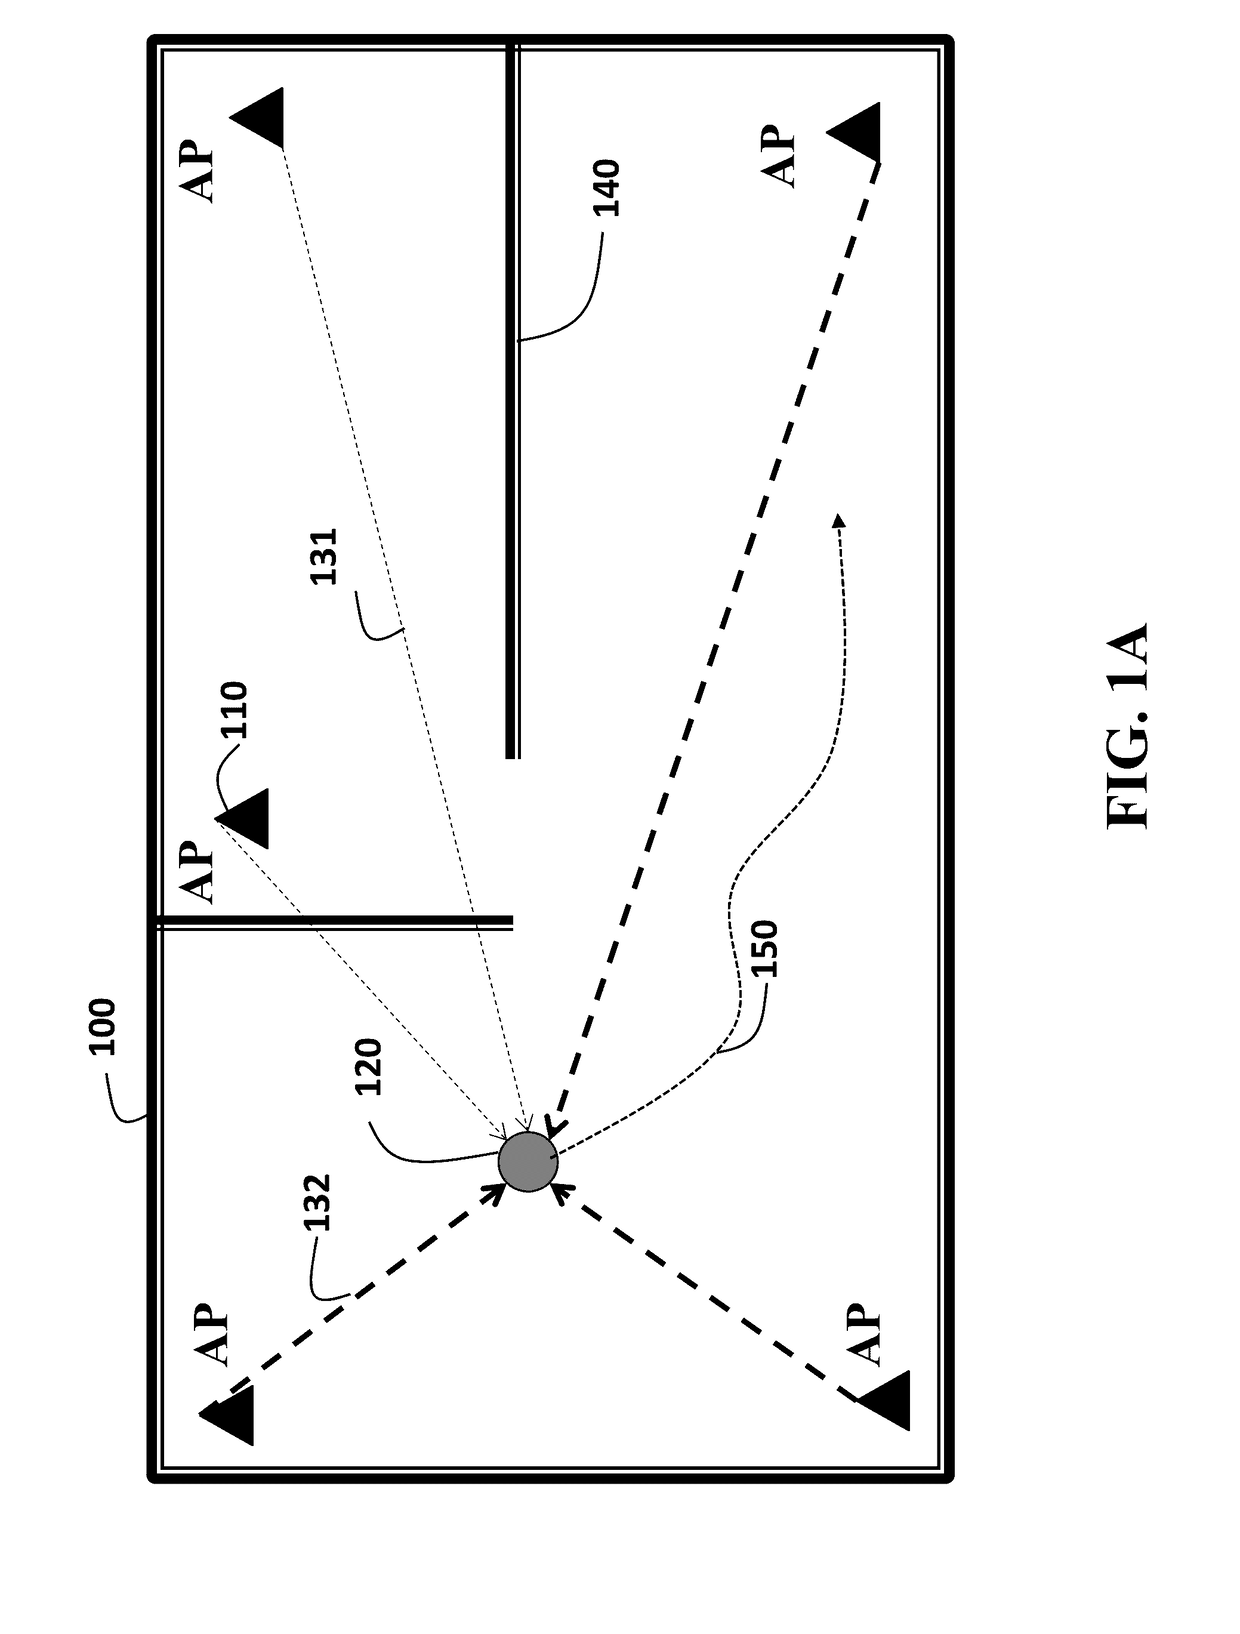 Device Localization using RSS Based Path Loss Exponent Estimation